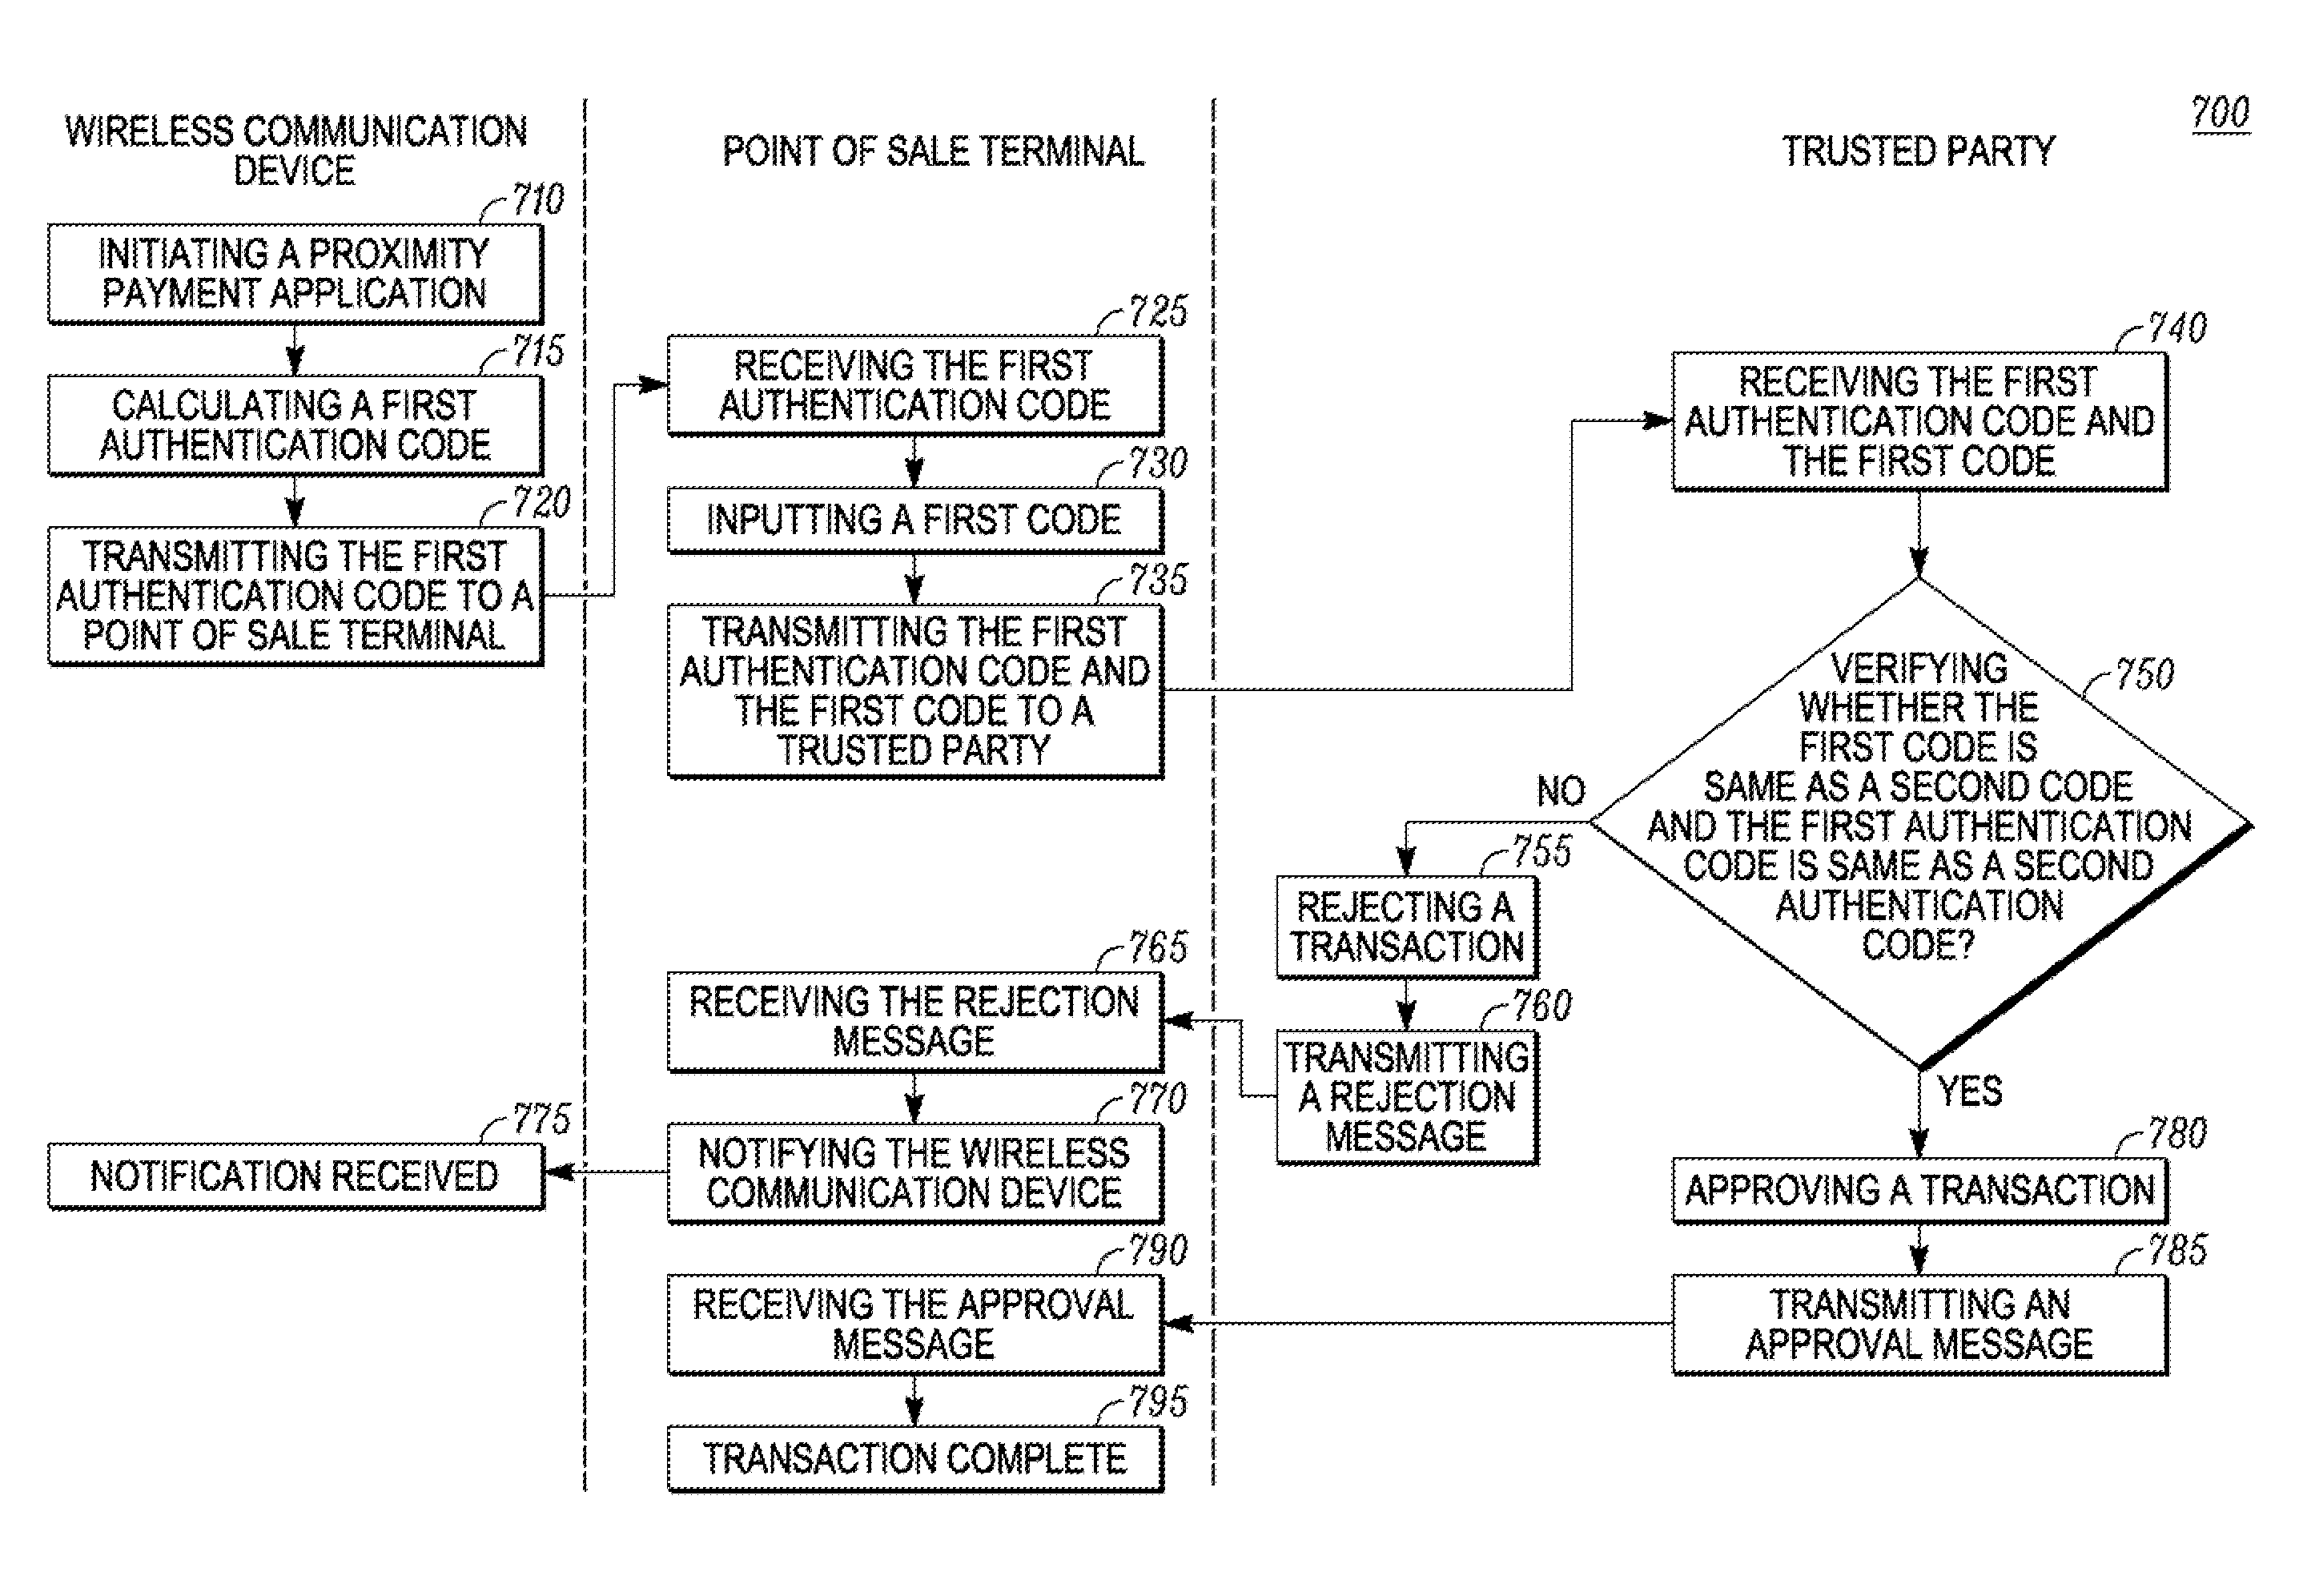 Method and apparatus for proximity payment provisioning between a wireless communication device and a trusted party